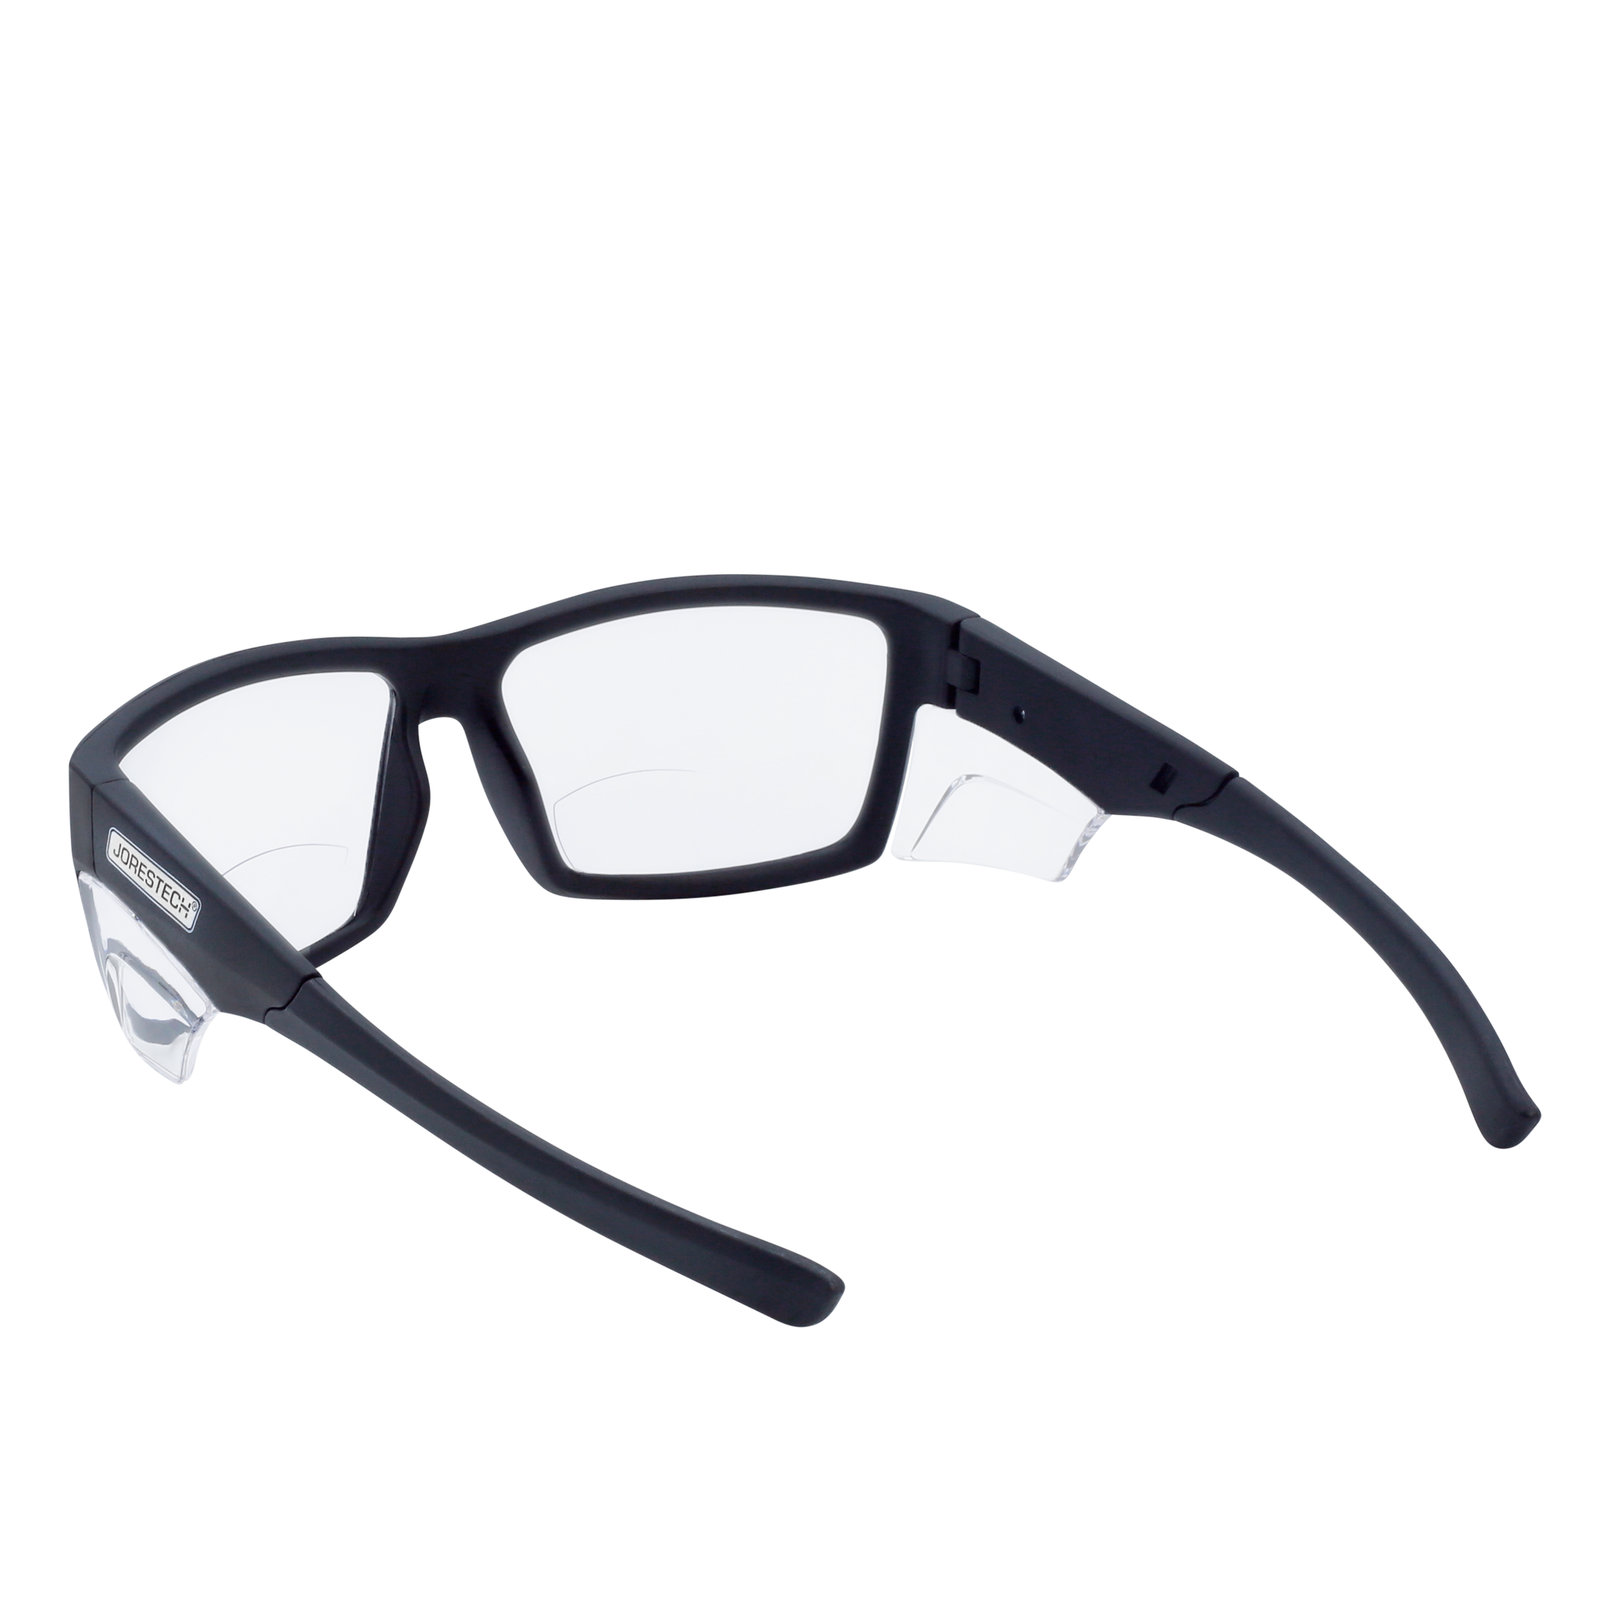 Diagonal view of a JORESTECH bifocal safety reader glass with side shield for high impact protection. These safety glasses have black frame and clear polycarbonate lenses. 